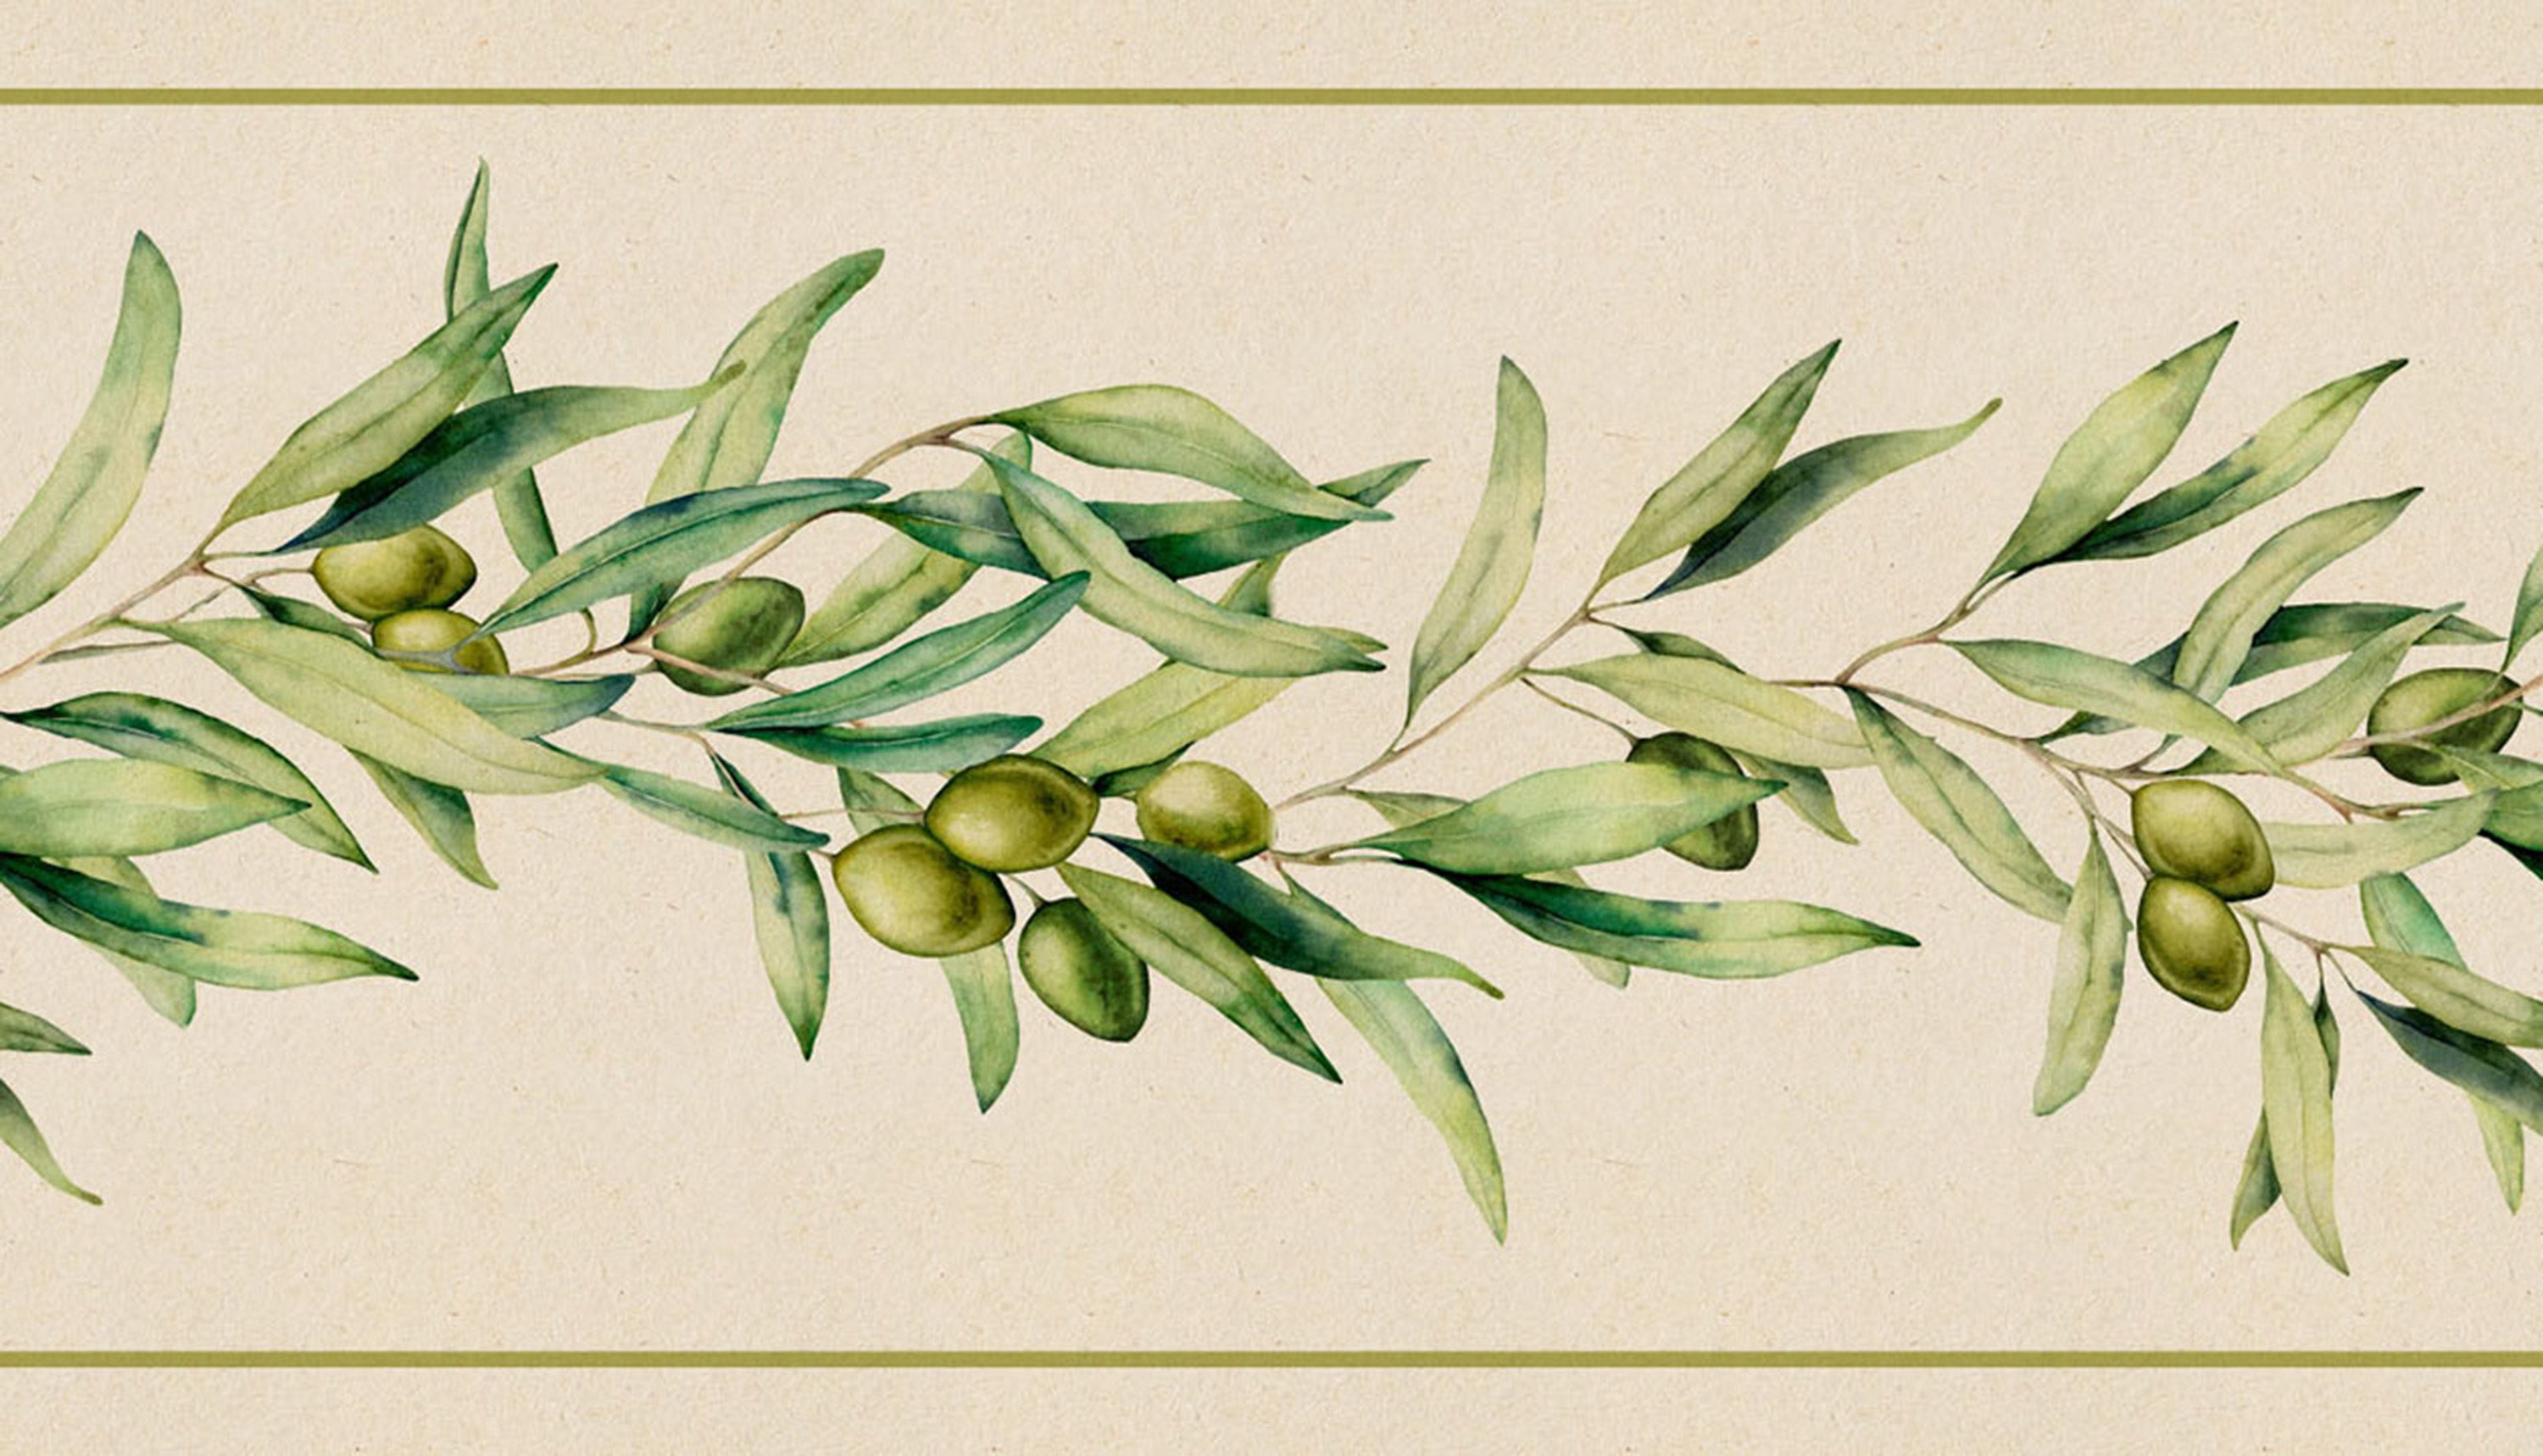 GB50140 Grace & Gardenia Olive Branch Peel and Stick Wallpaper Border 10in or 8in Height x 15ft Long, Beige Green